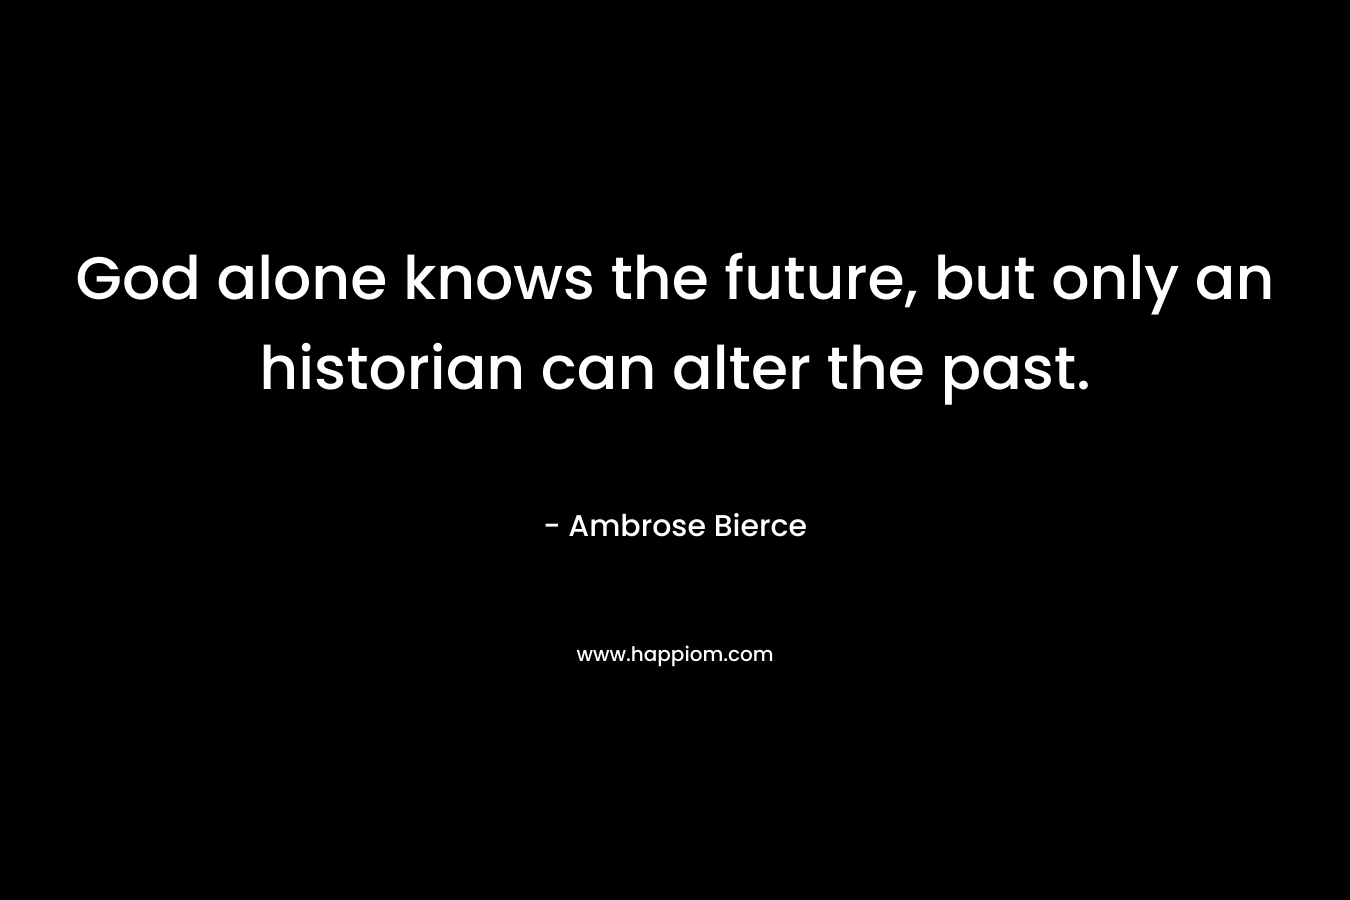 God alone knows the future, but only an historian can alter the past. – Ambrose Bierce